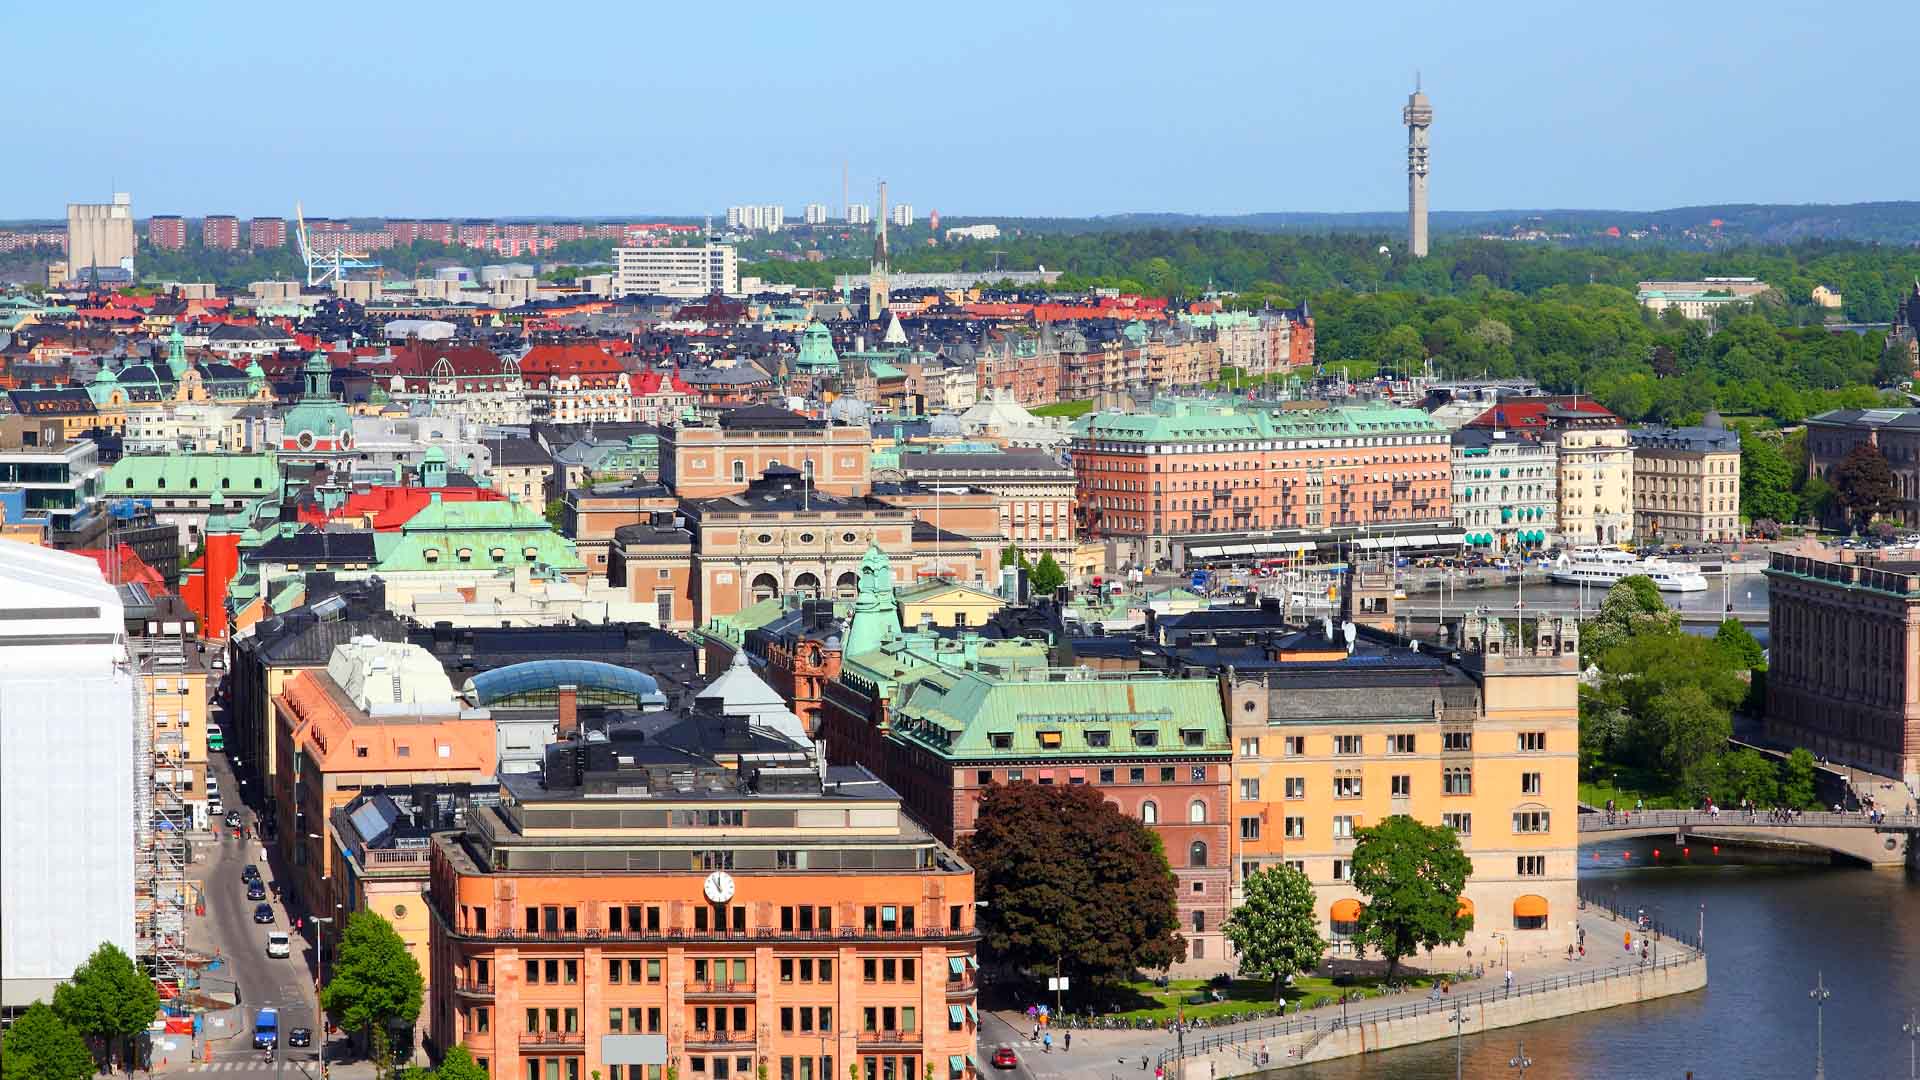 The Norrmalm district of Stockholm